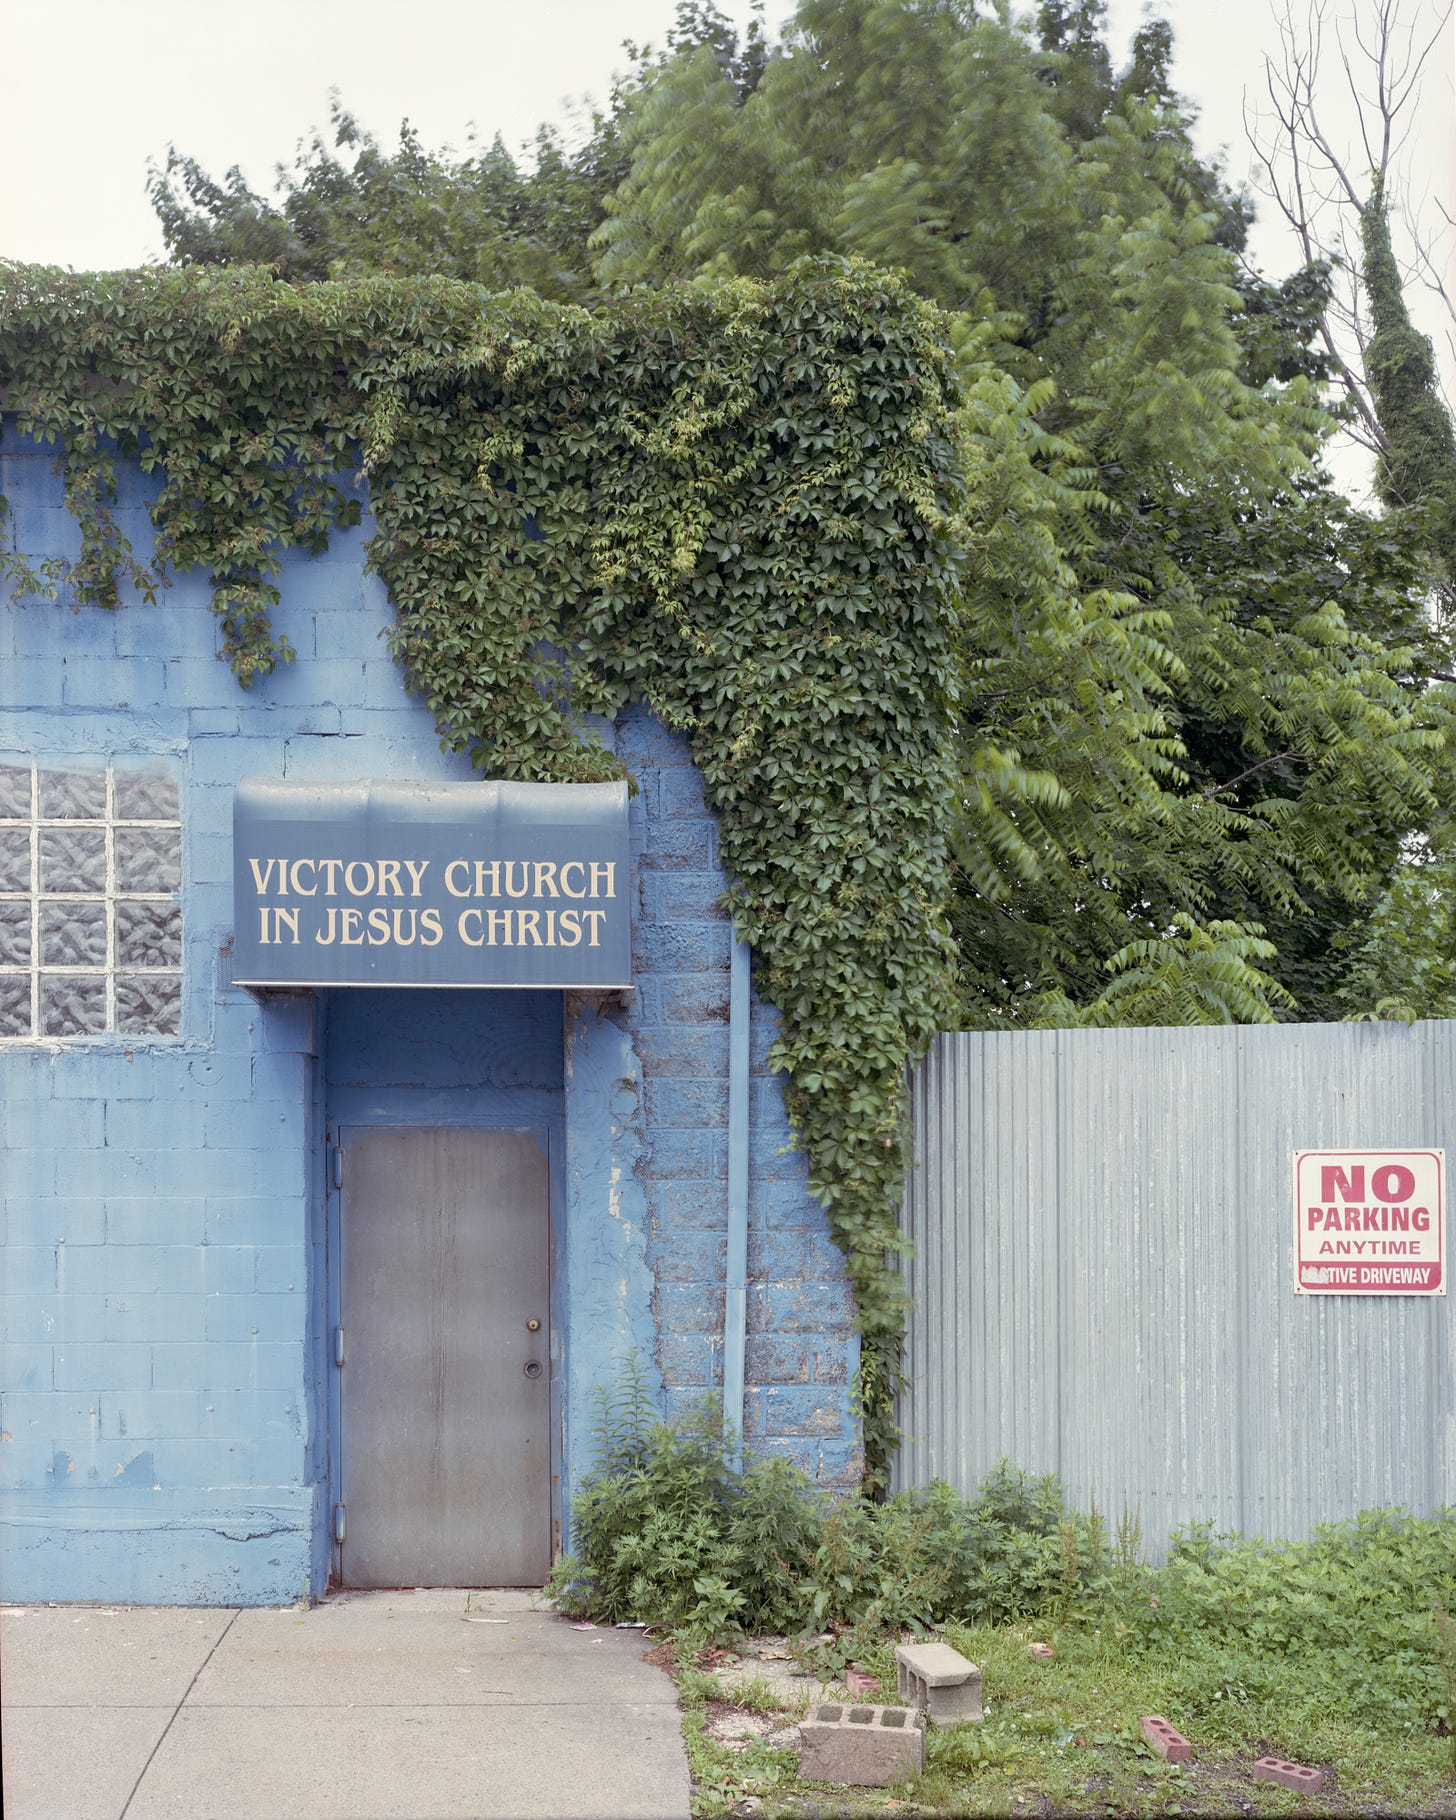 Victory Church in Jesus Christ, blue wall and awning covered in ivy